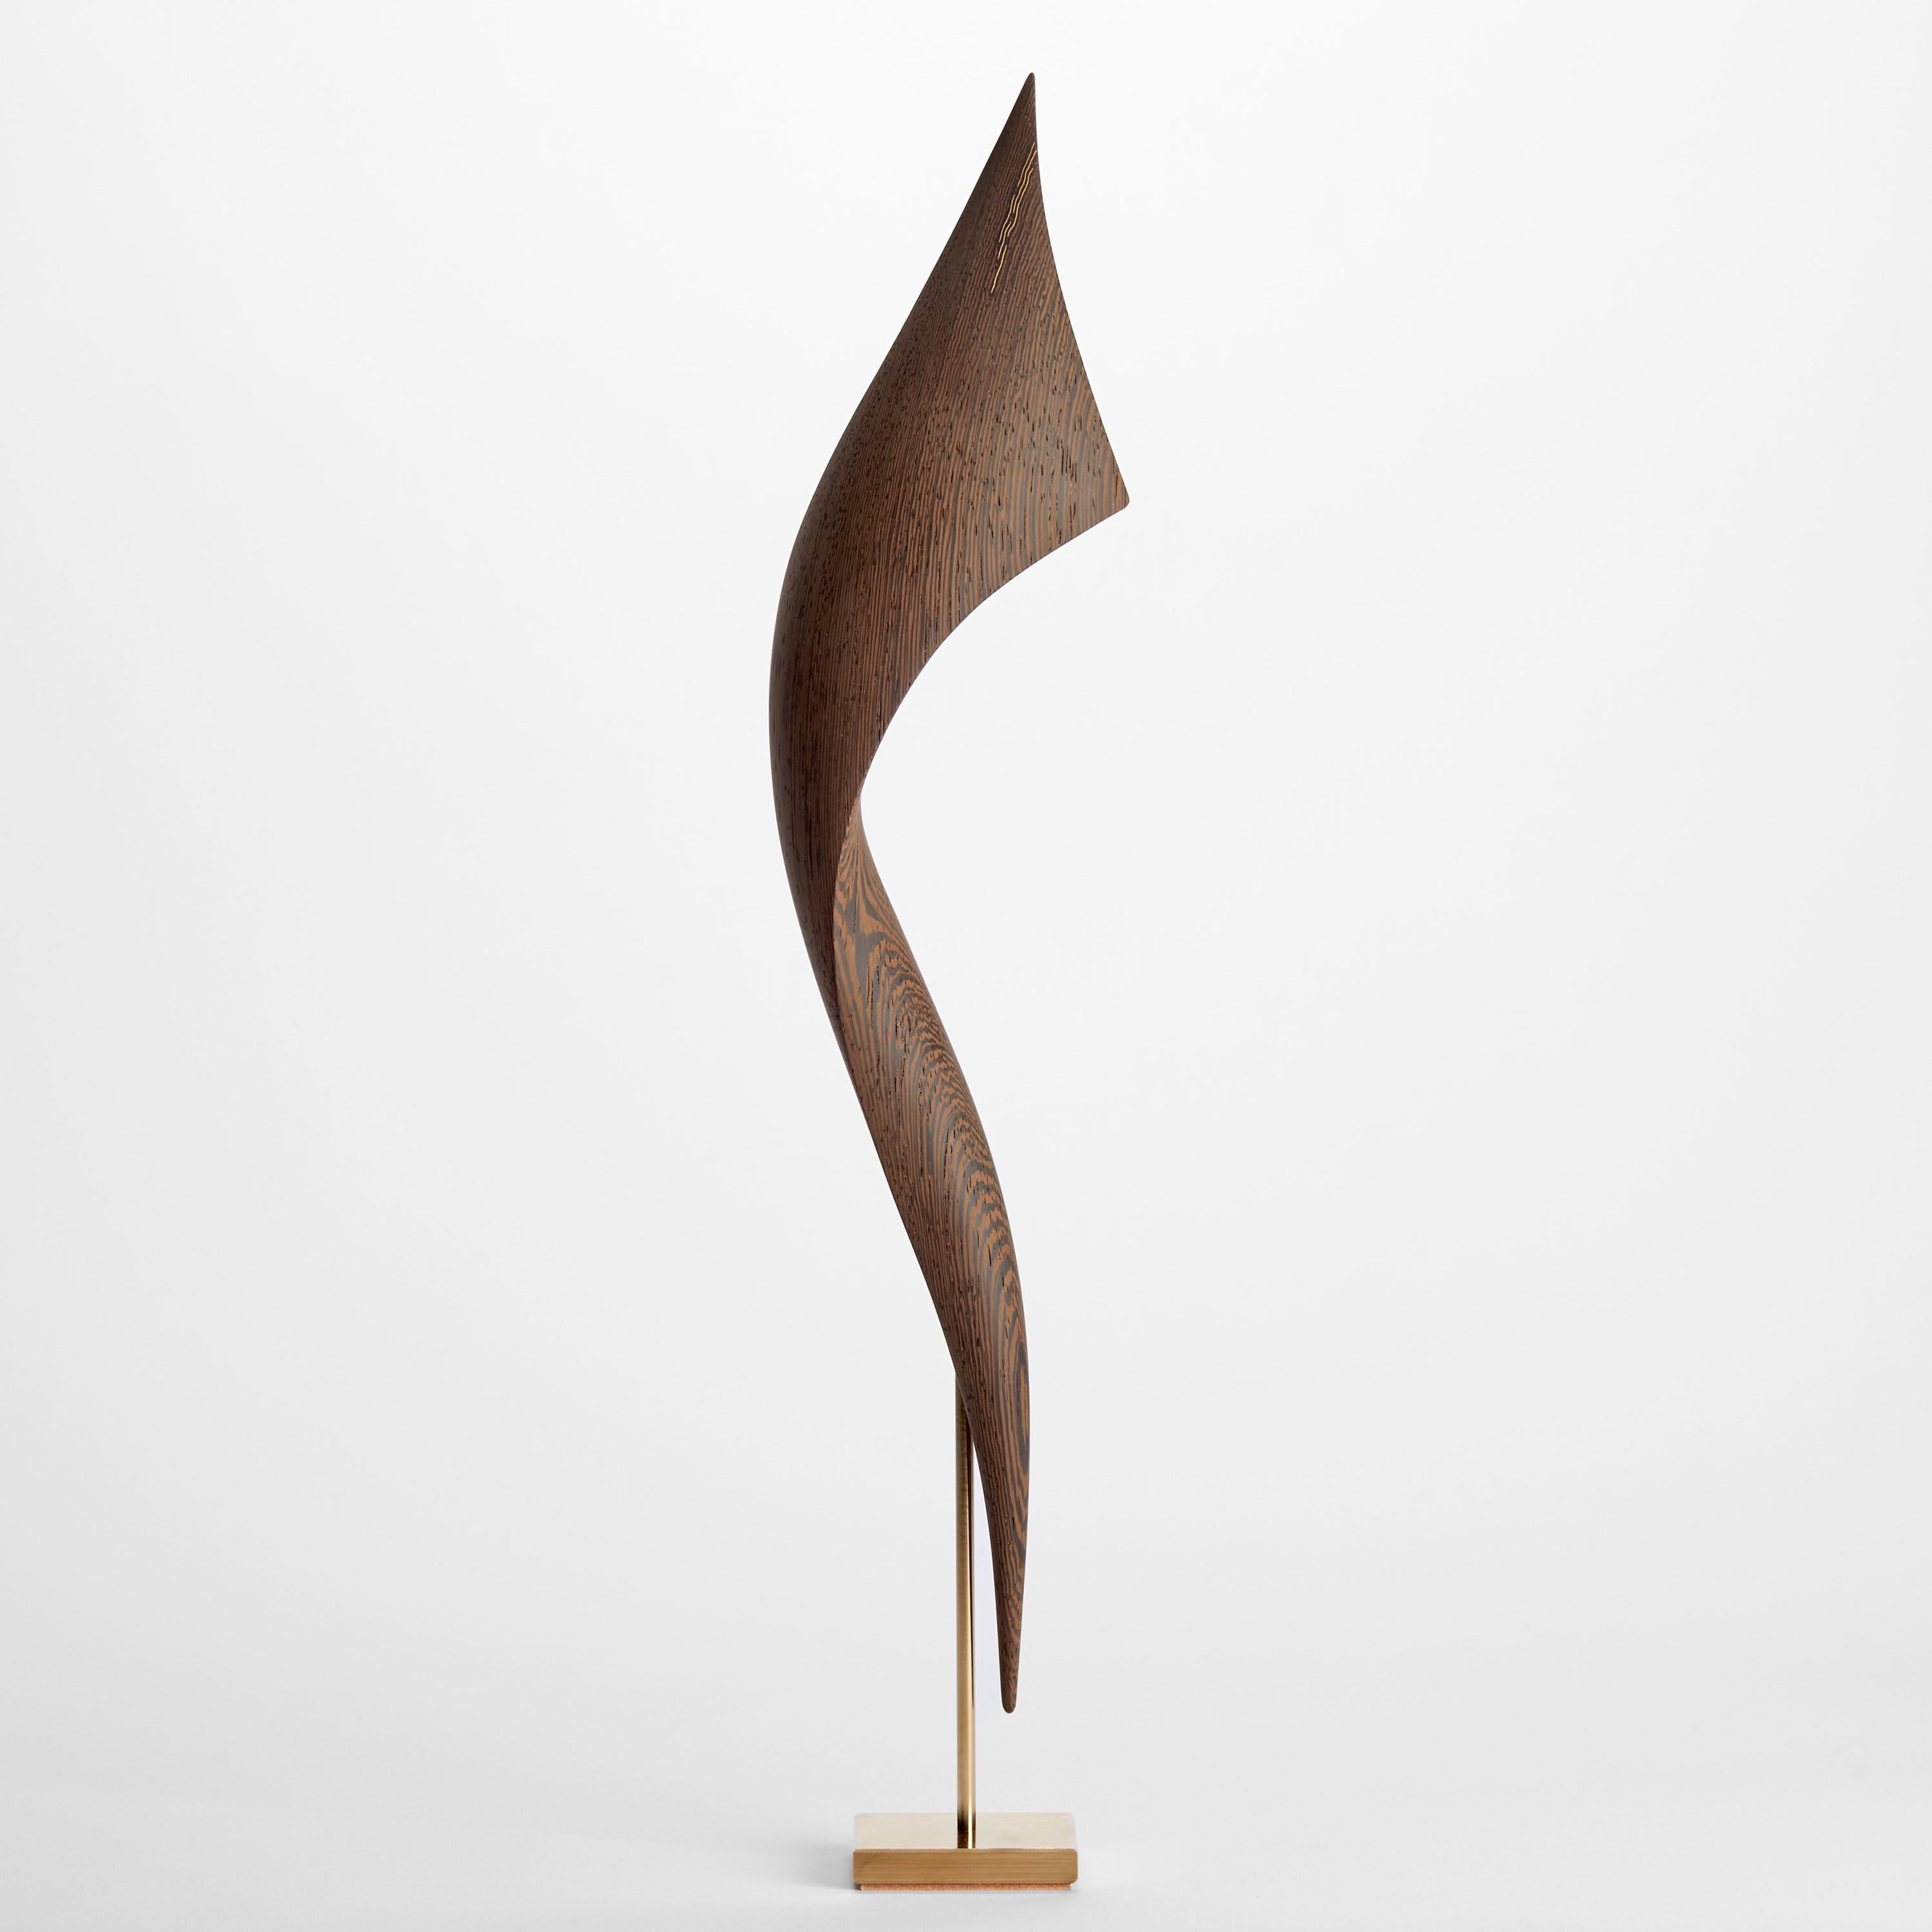 'Flow Petit No 20' is a unique artwork by the Danish artists, Egeværk. It is created from Wengé sourced from Africa - Congo and Cameroon - (wood, FSC* certified) with an inlay of 24ct fine gold and gold plated stainless steel foot. Signed on the